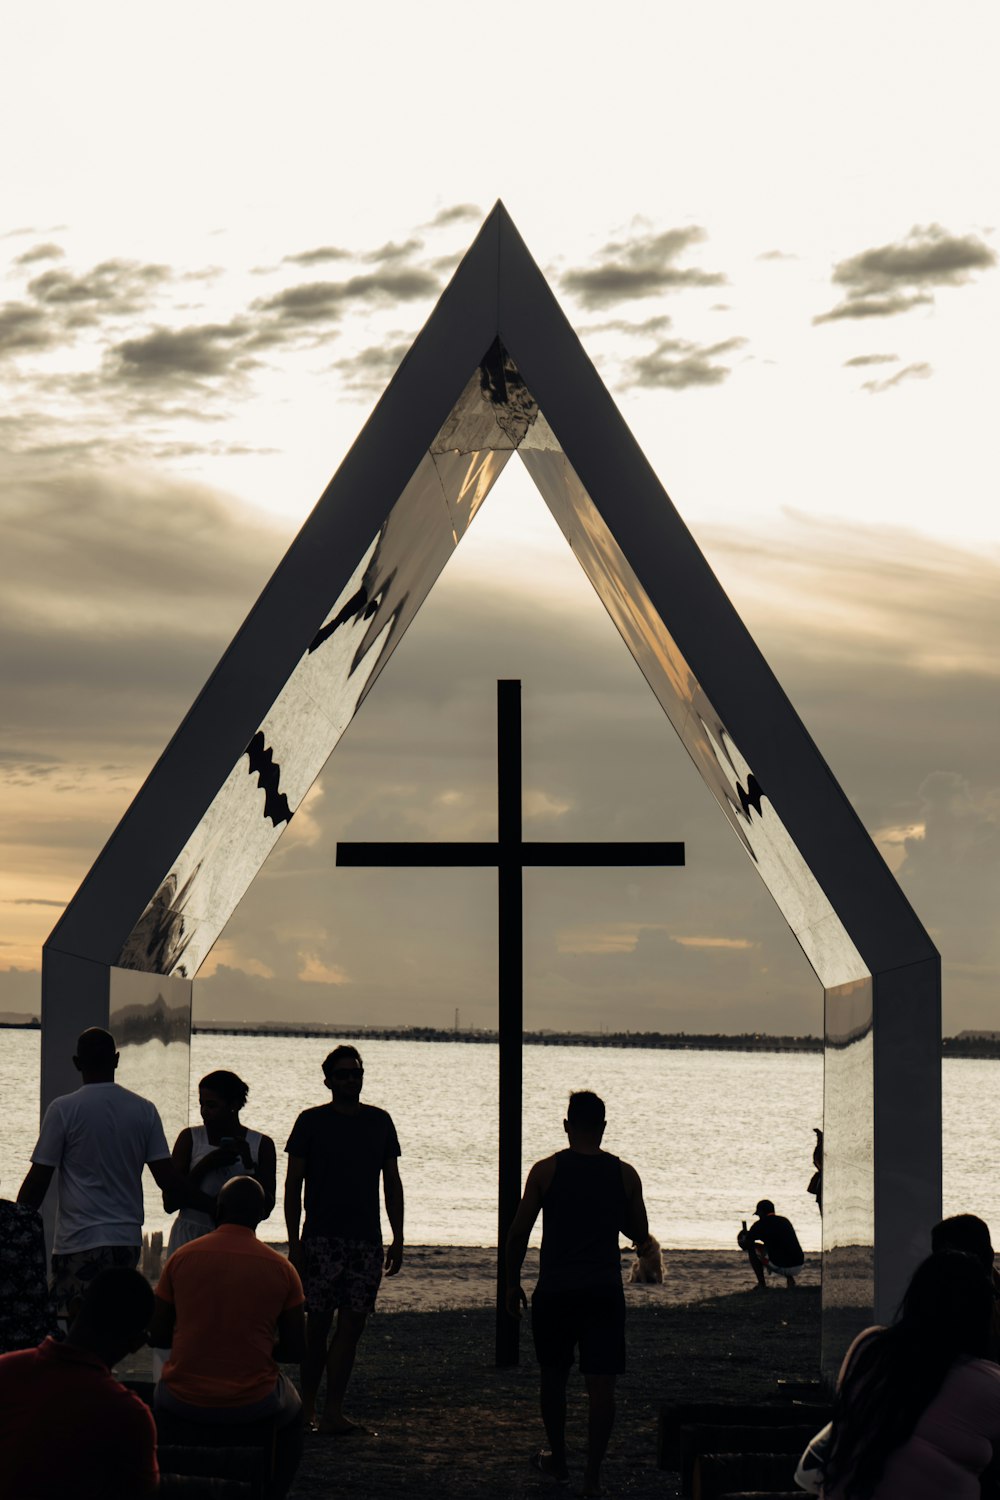 a group of people standing in front of a cross